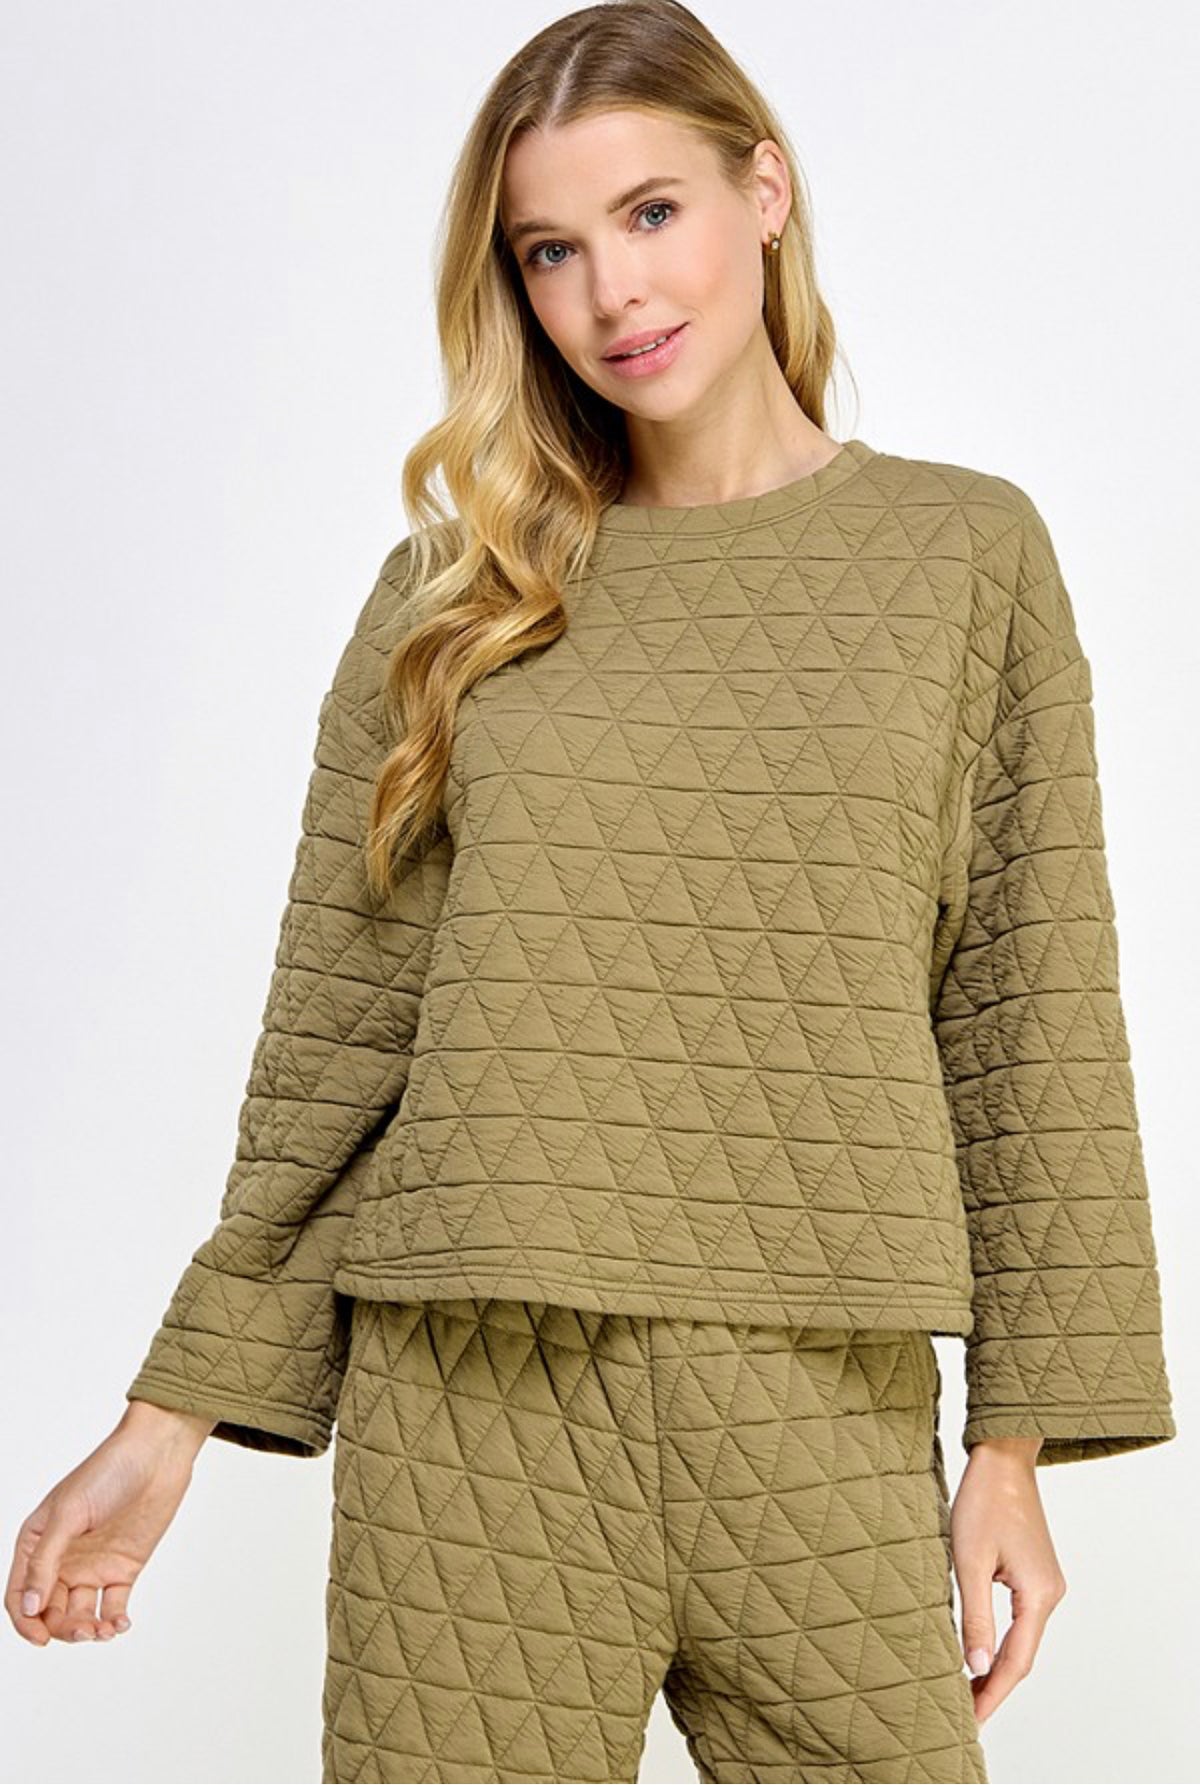 QUILTED LONG SLV TOP